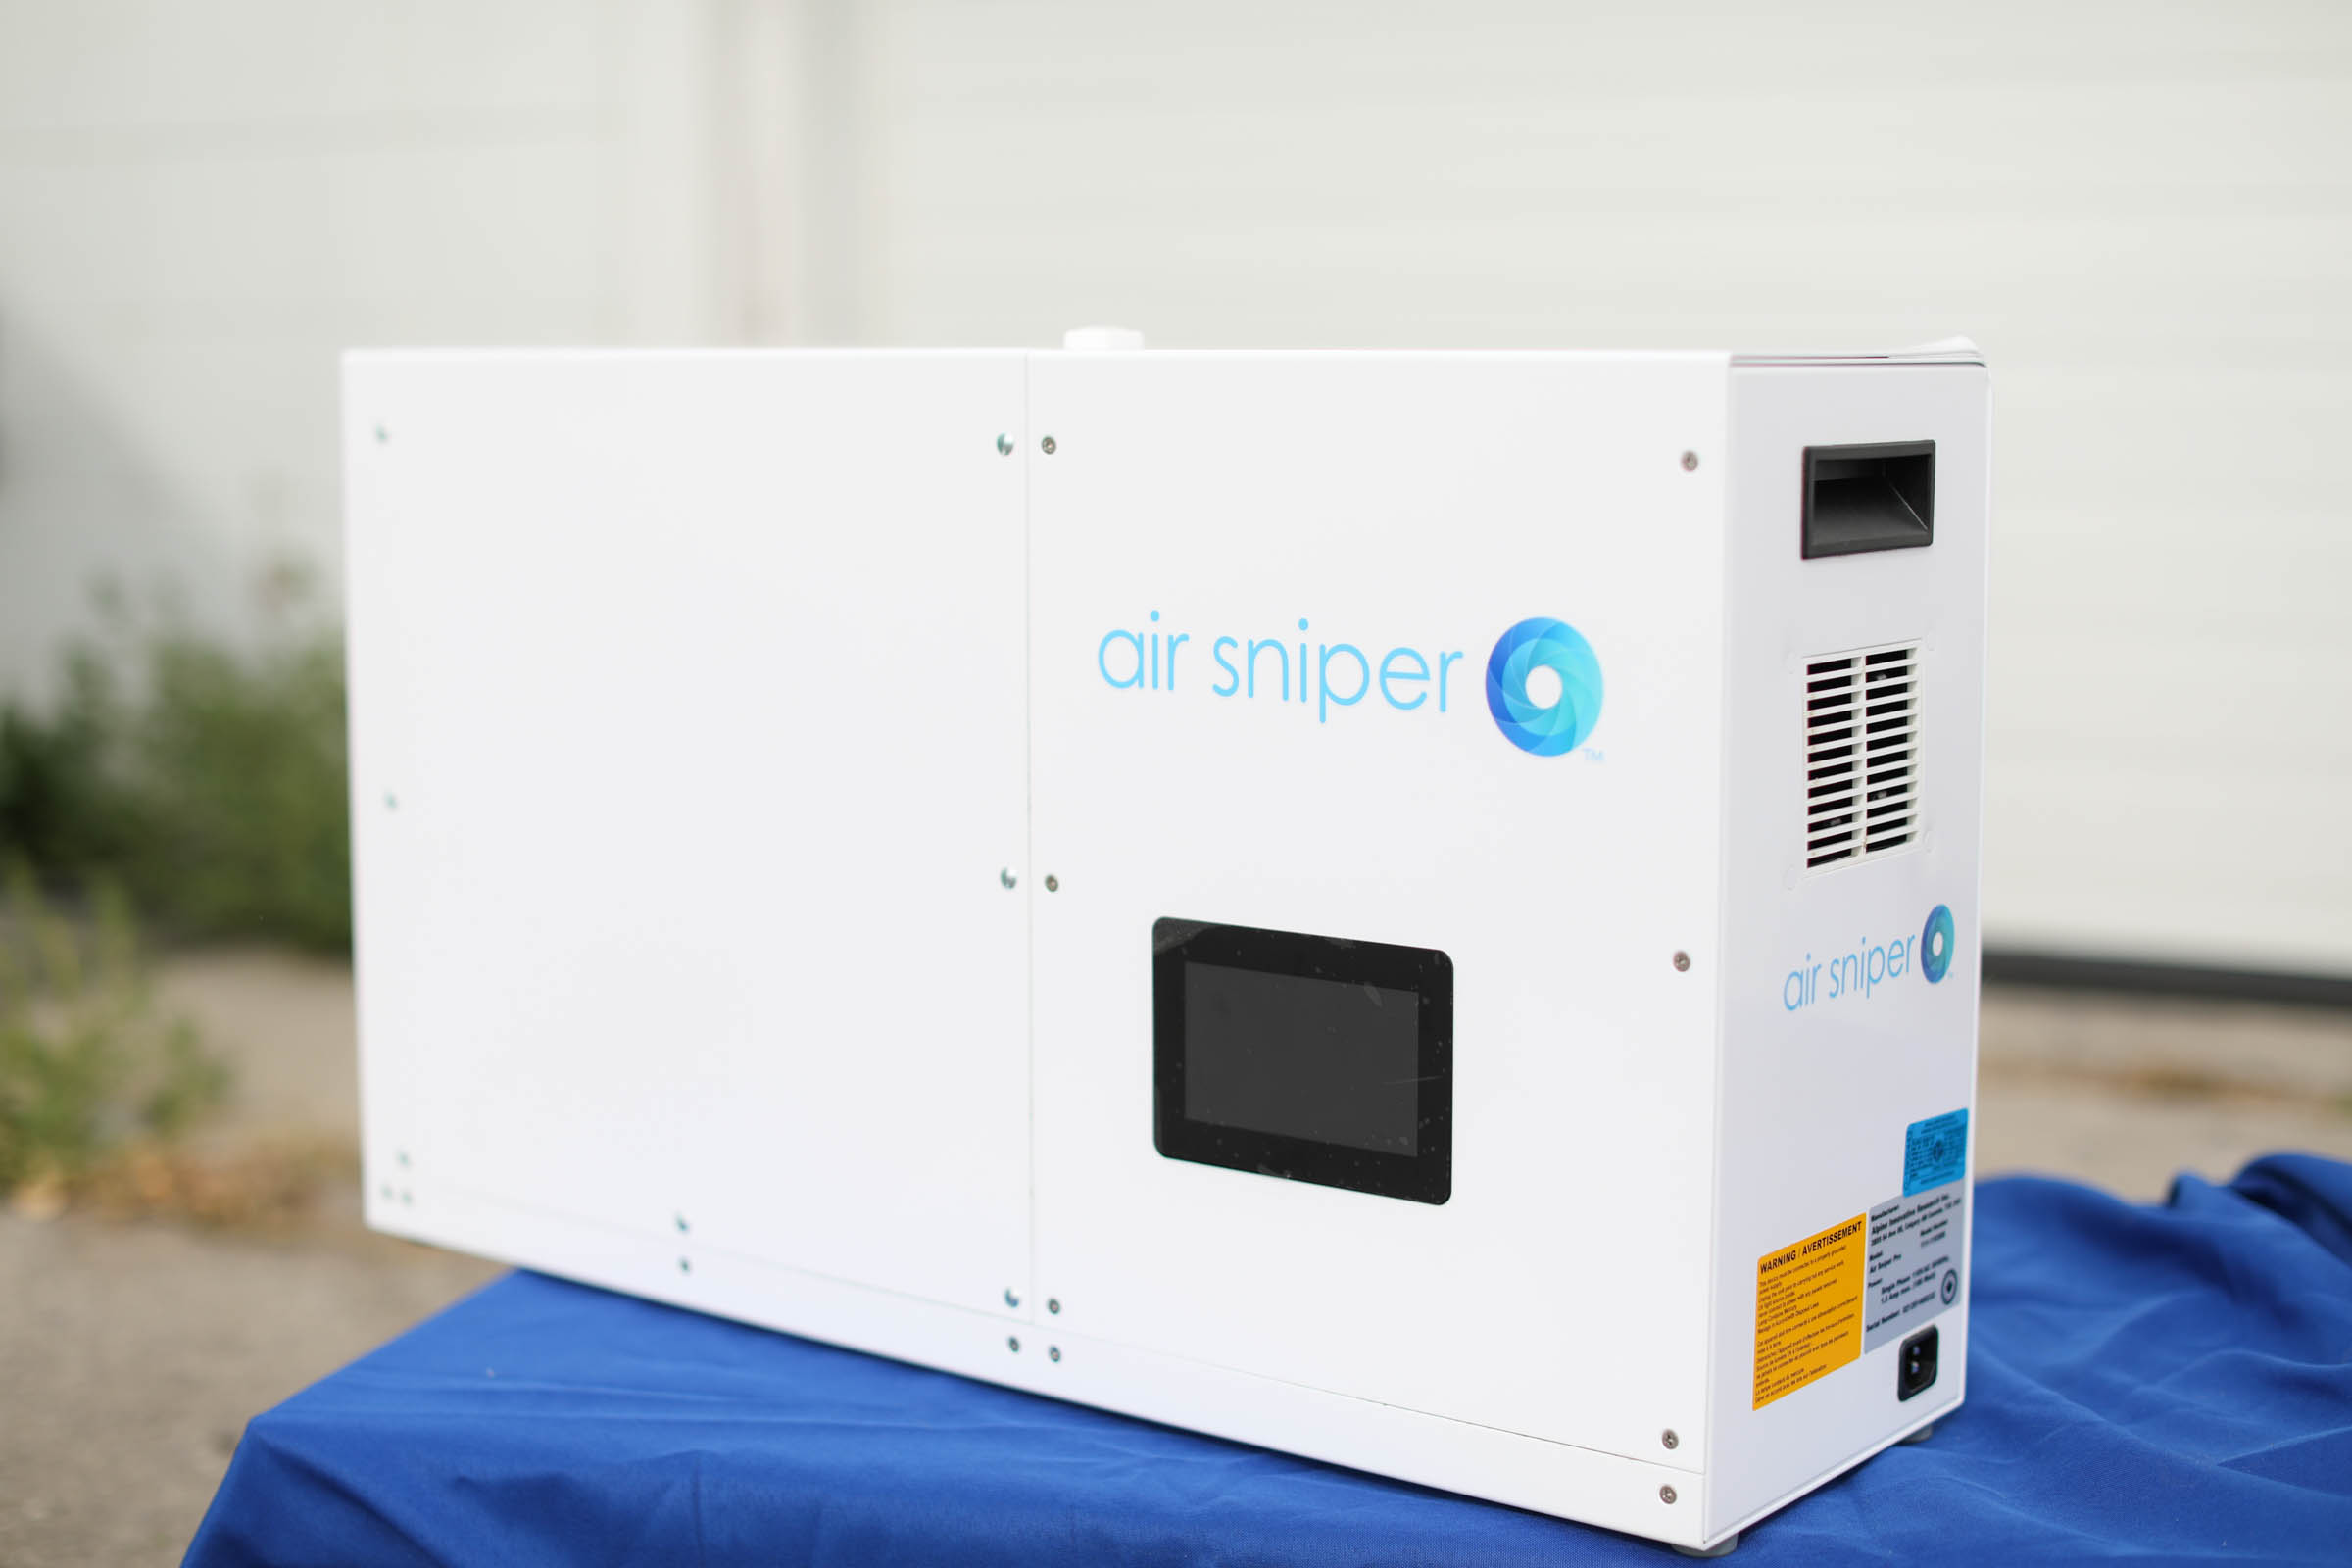 Ontario School Board Purchases Air Sniper Purification System to Protect Students & Staff from Airborne Pathogens